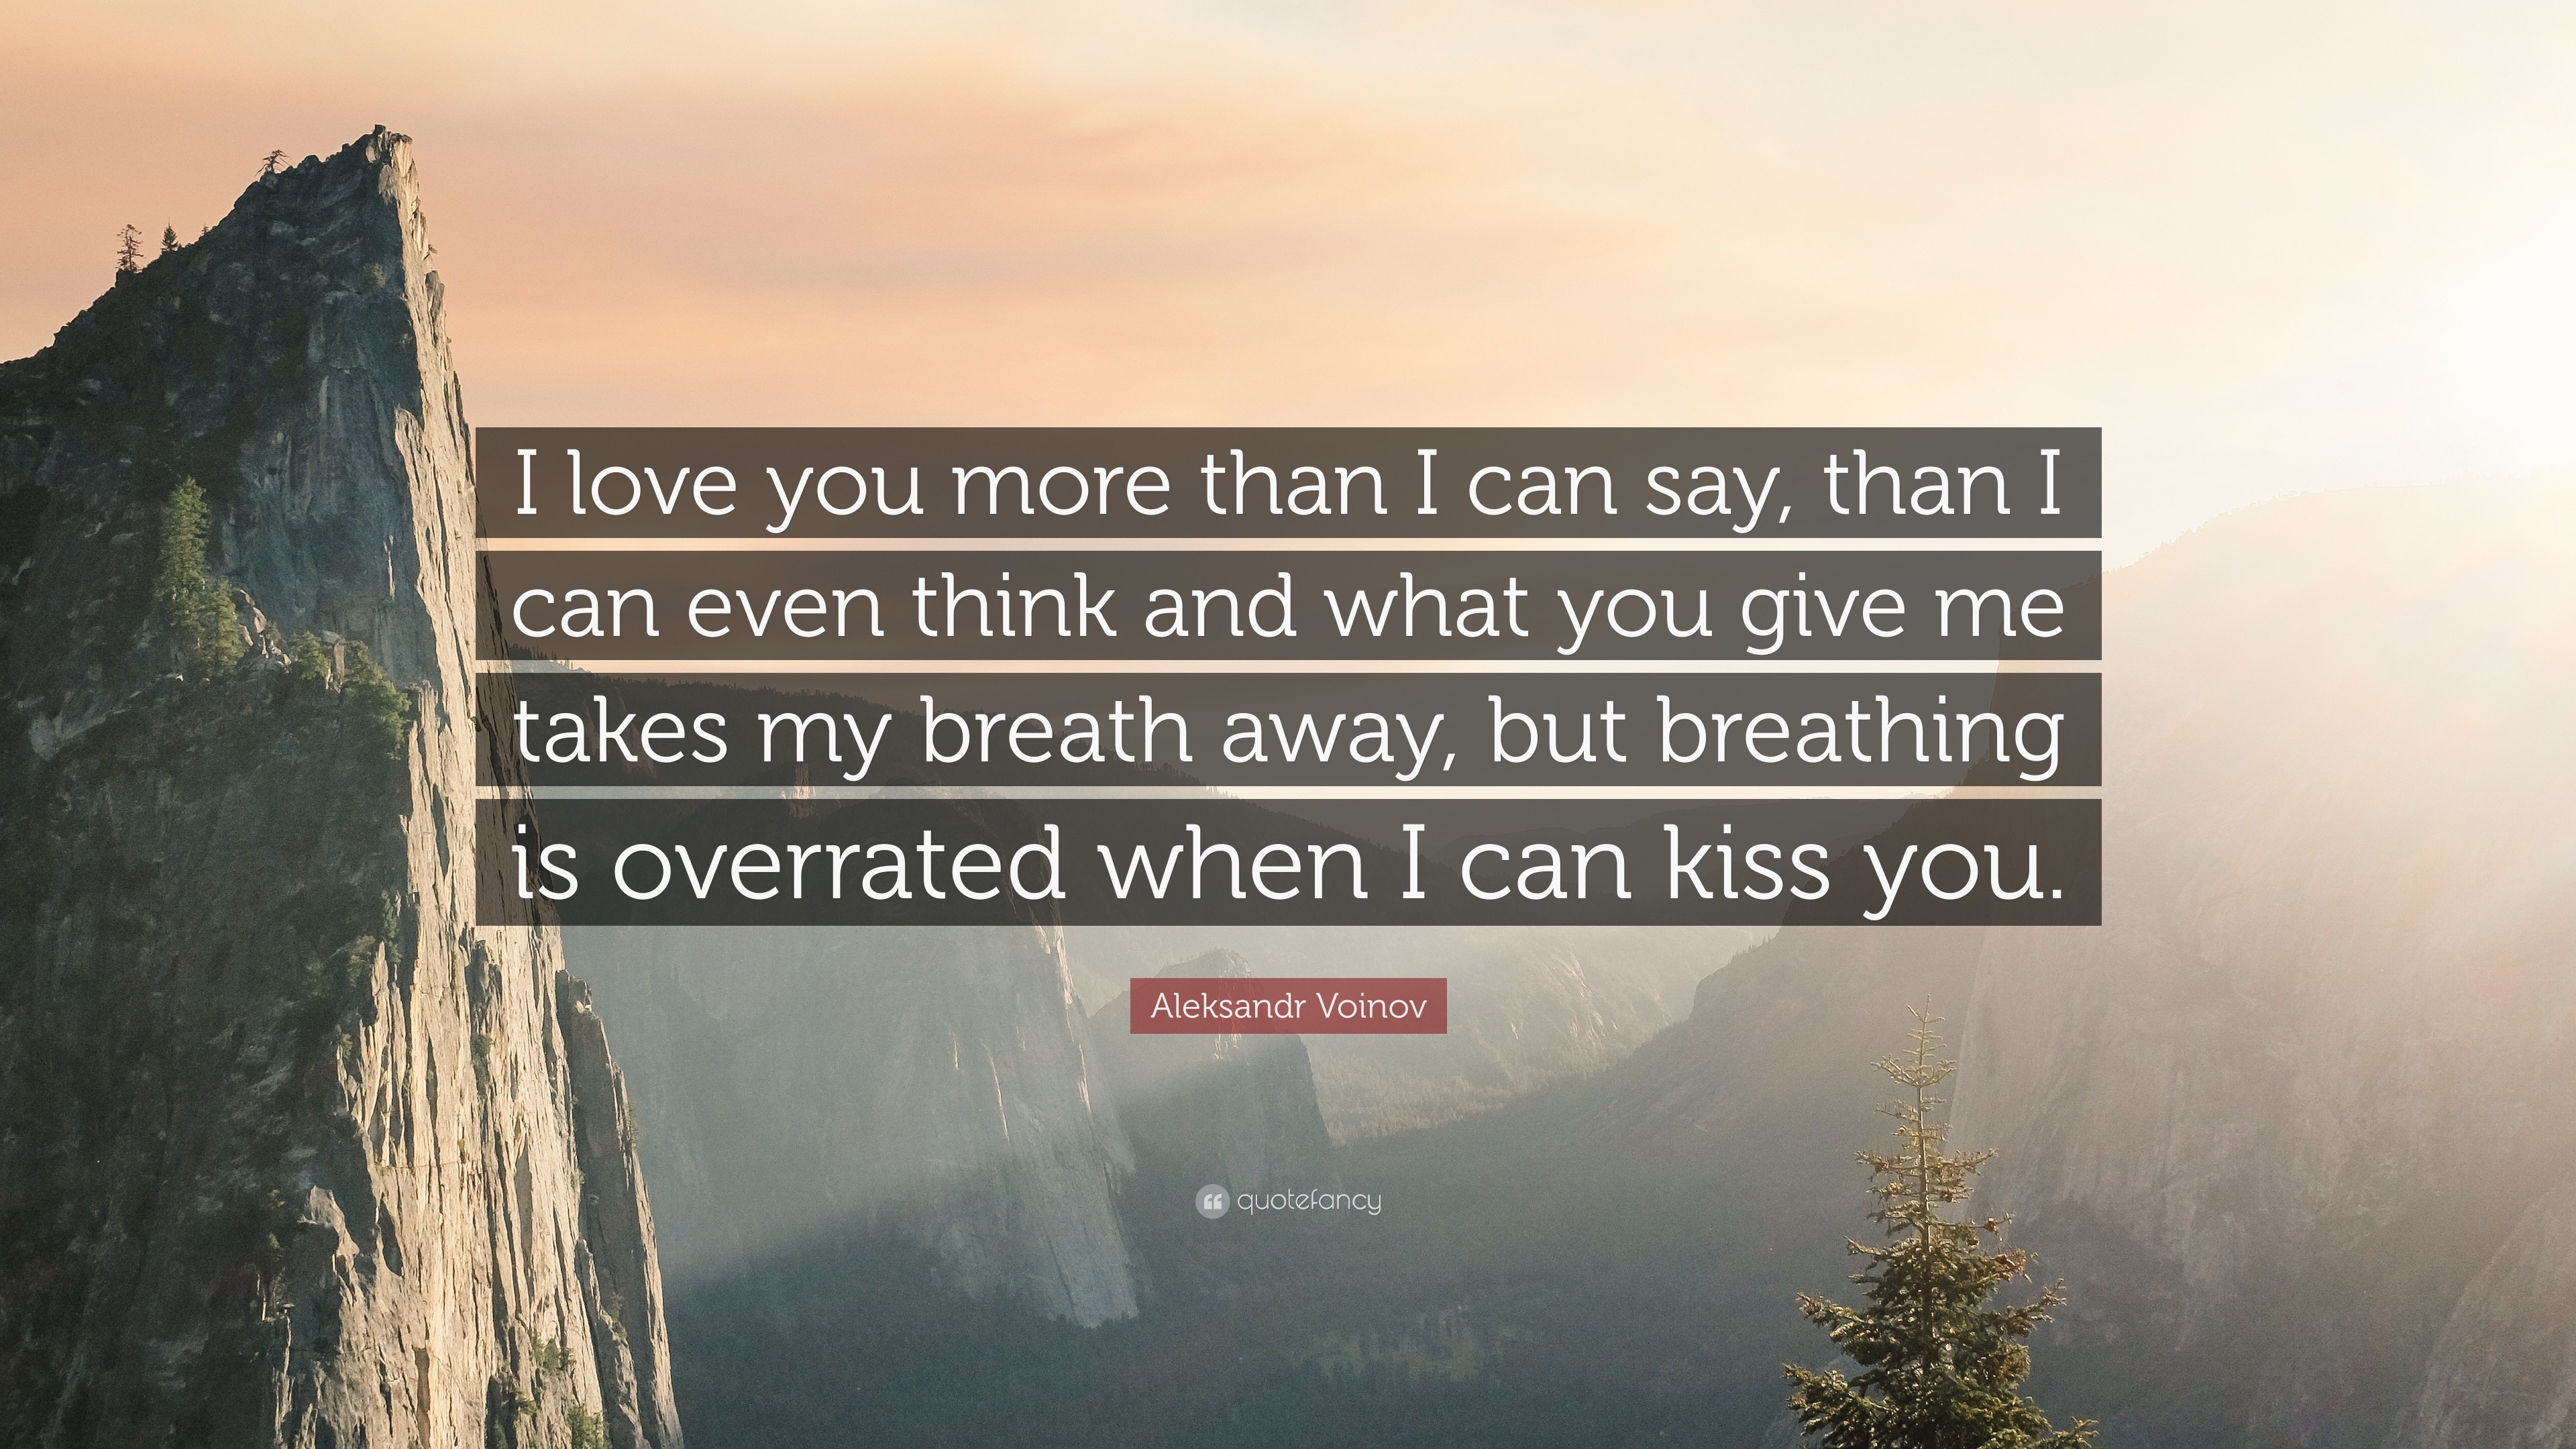 Aleksandr Voinov Quote: "I love you more than I can say ...